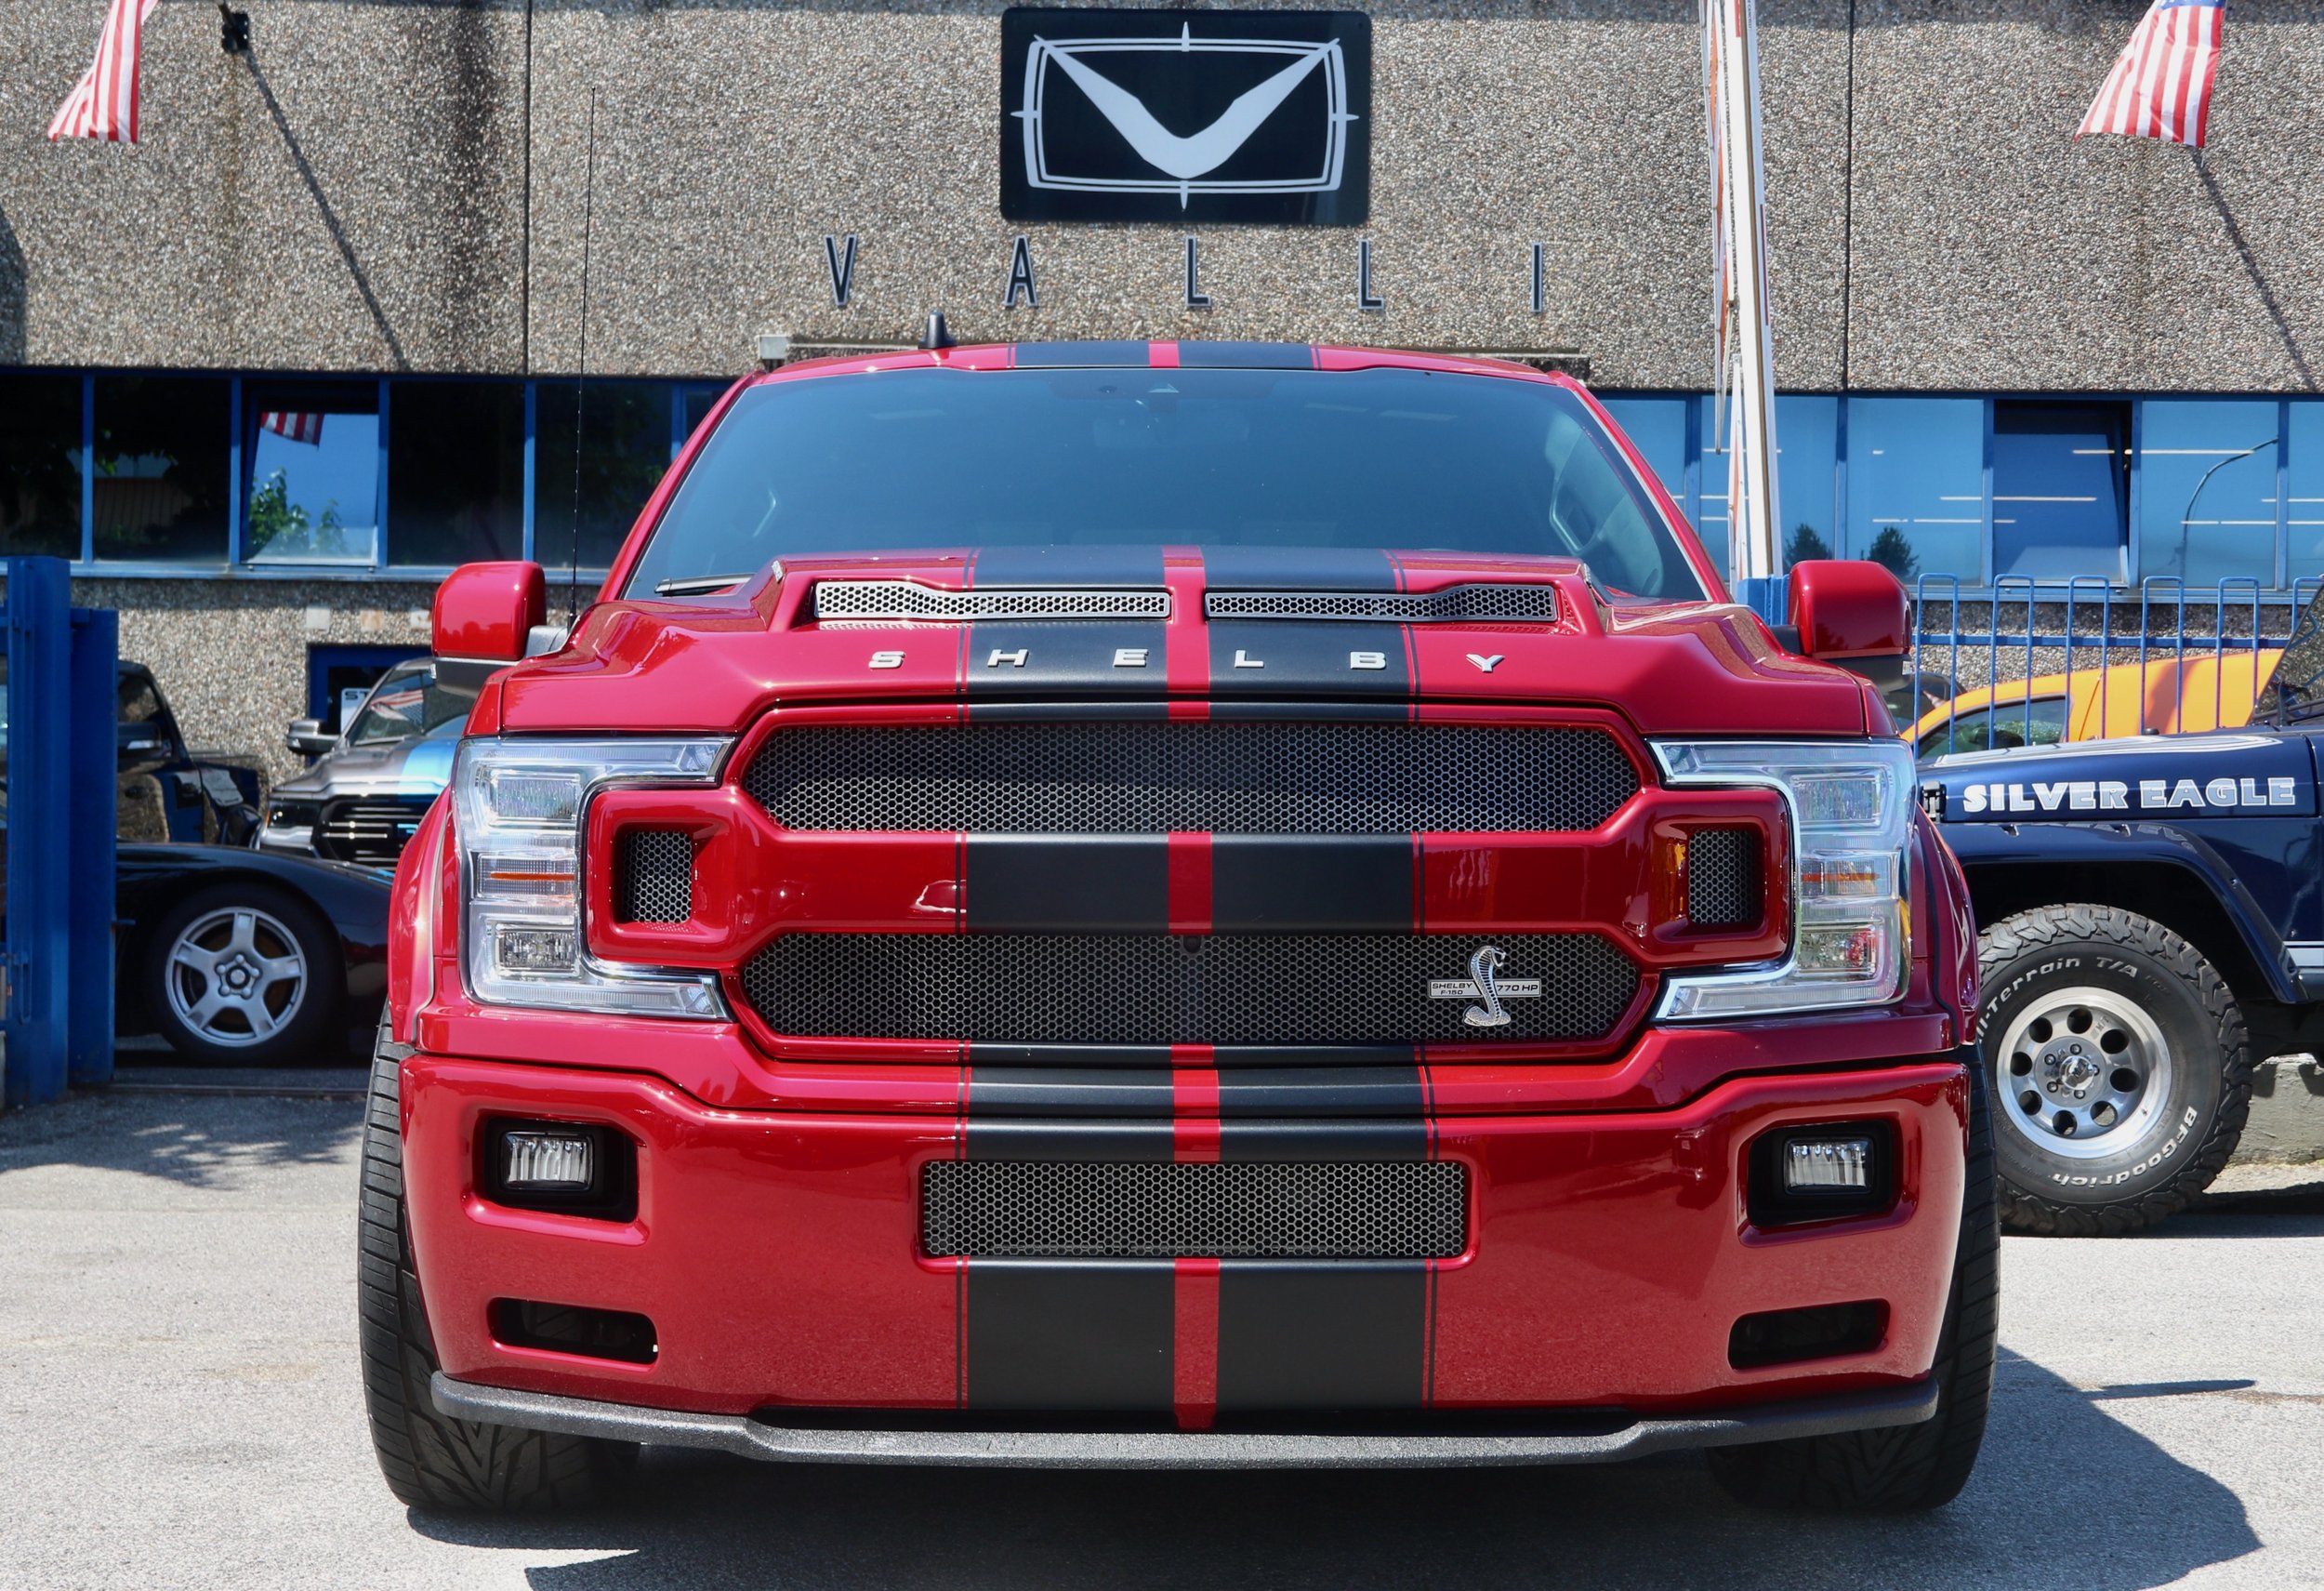 02 2020 Ford F150 Shelby Super Snake C.S.M. 20STS0259 Rapid Red VALLIstore Wide-Body.jpeg